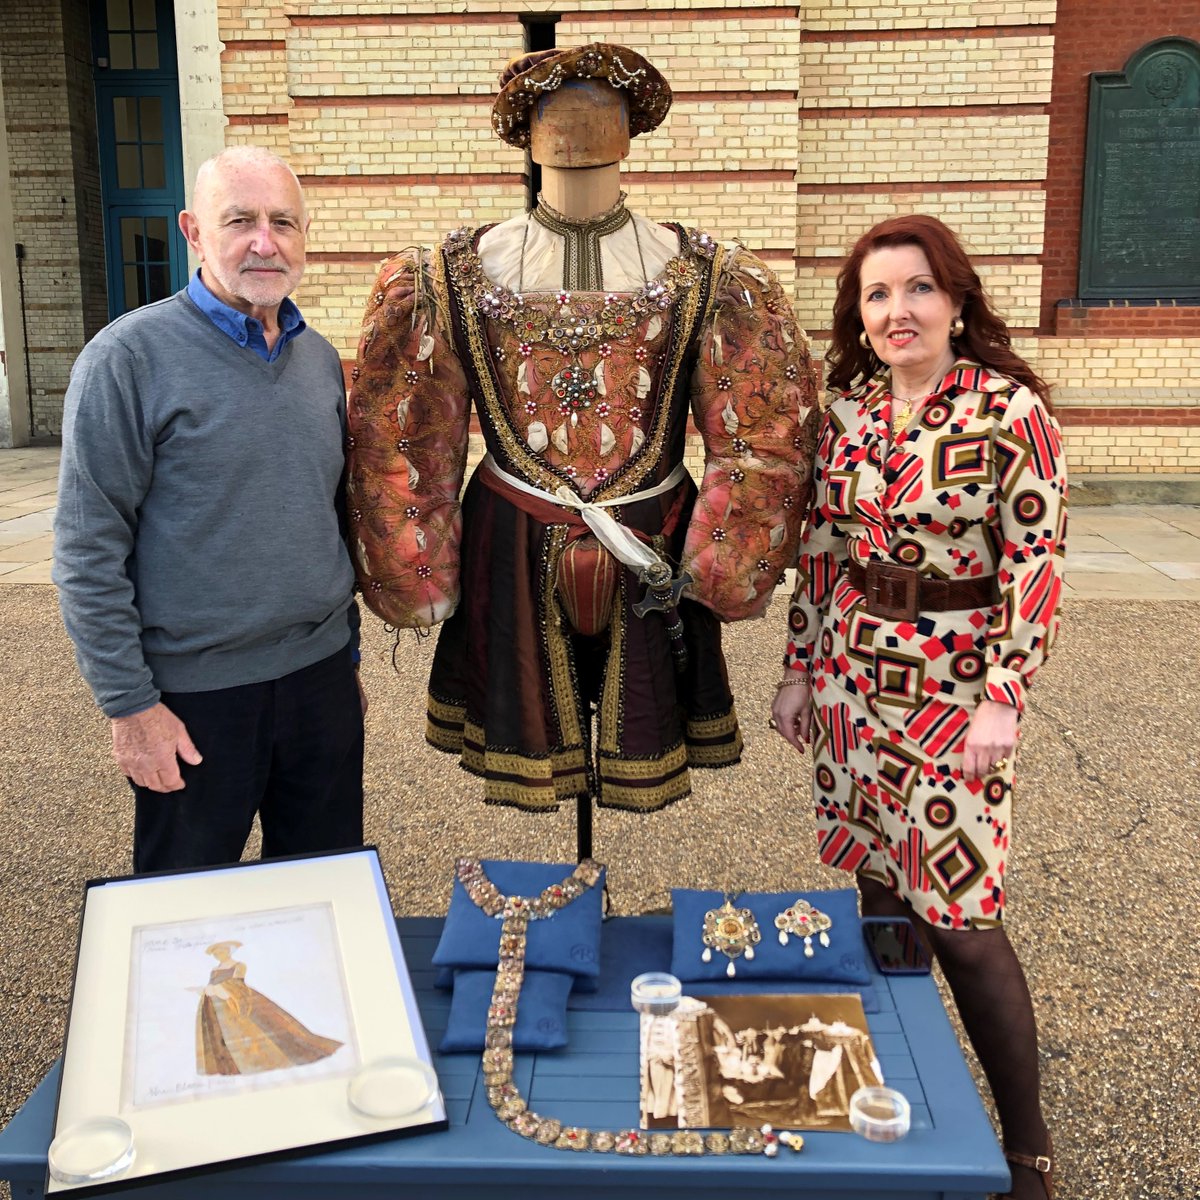 Don't miss tonight's special #BBC100 episode of @BBC_ARoadshow, featuring costumes by Ann & John Bloomfield (preserved by #BFINationalArchive), who worked on many ground-breaking BBC dramas including The Six Wives of Henry VII theb.fi/3SfBQzw